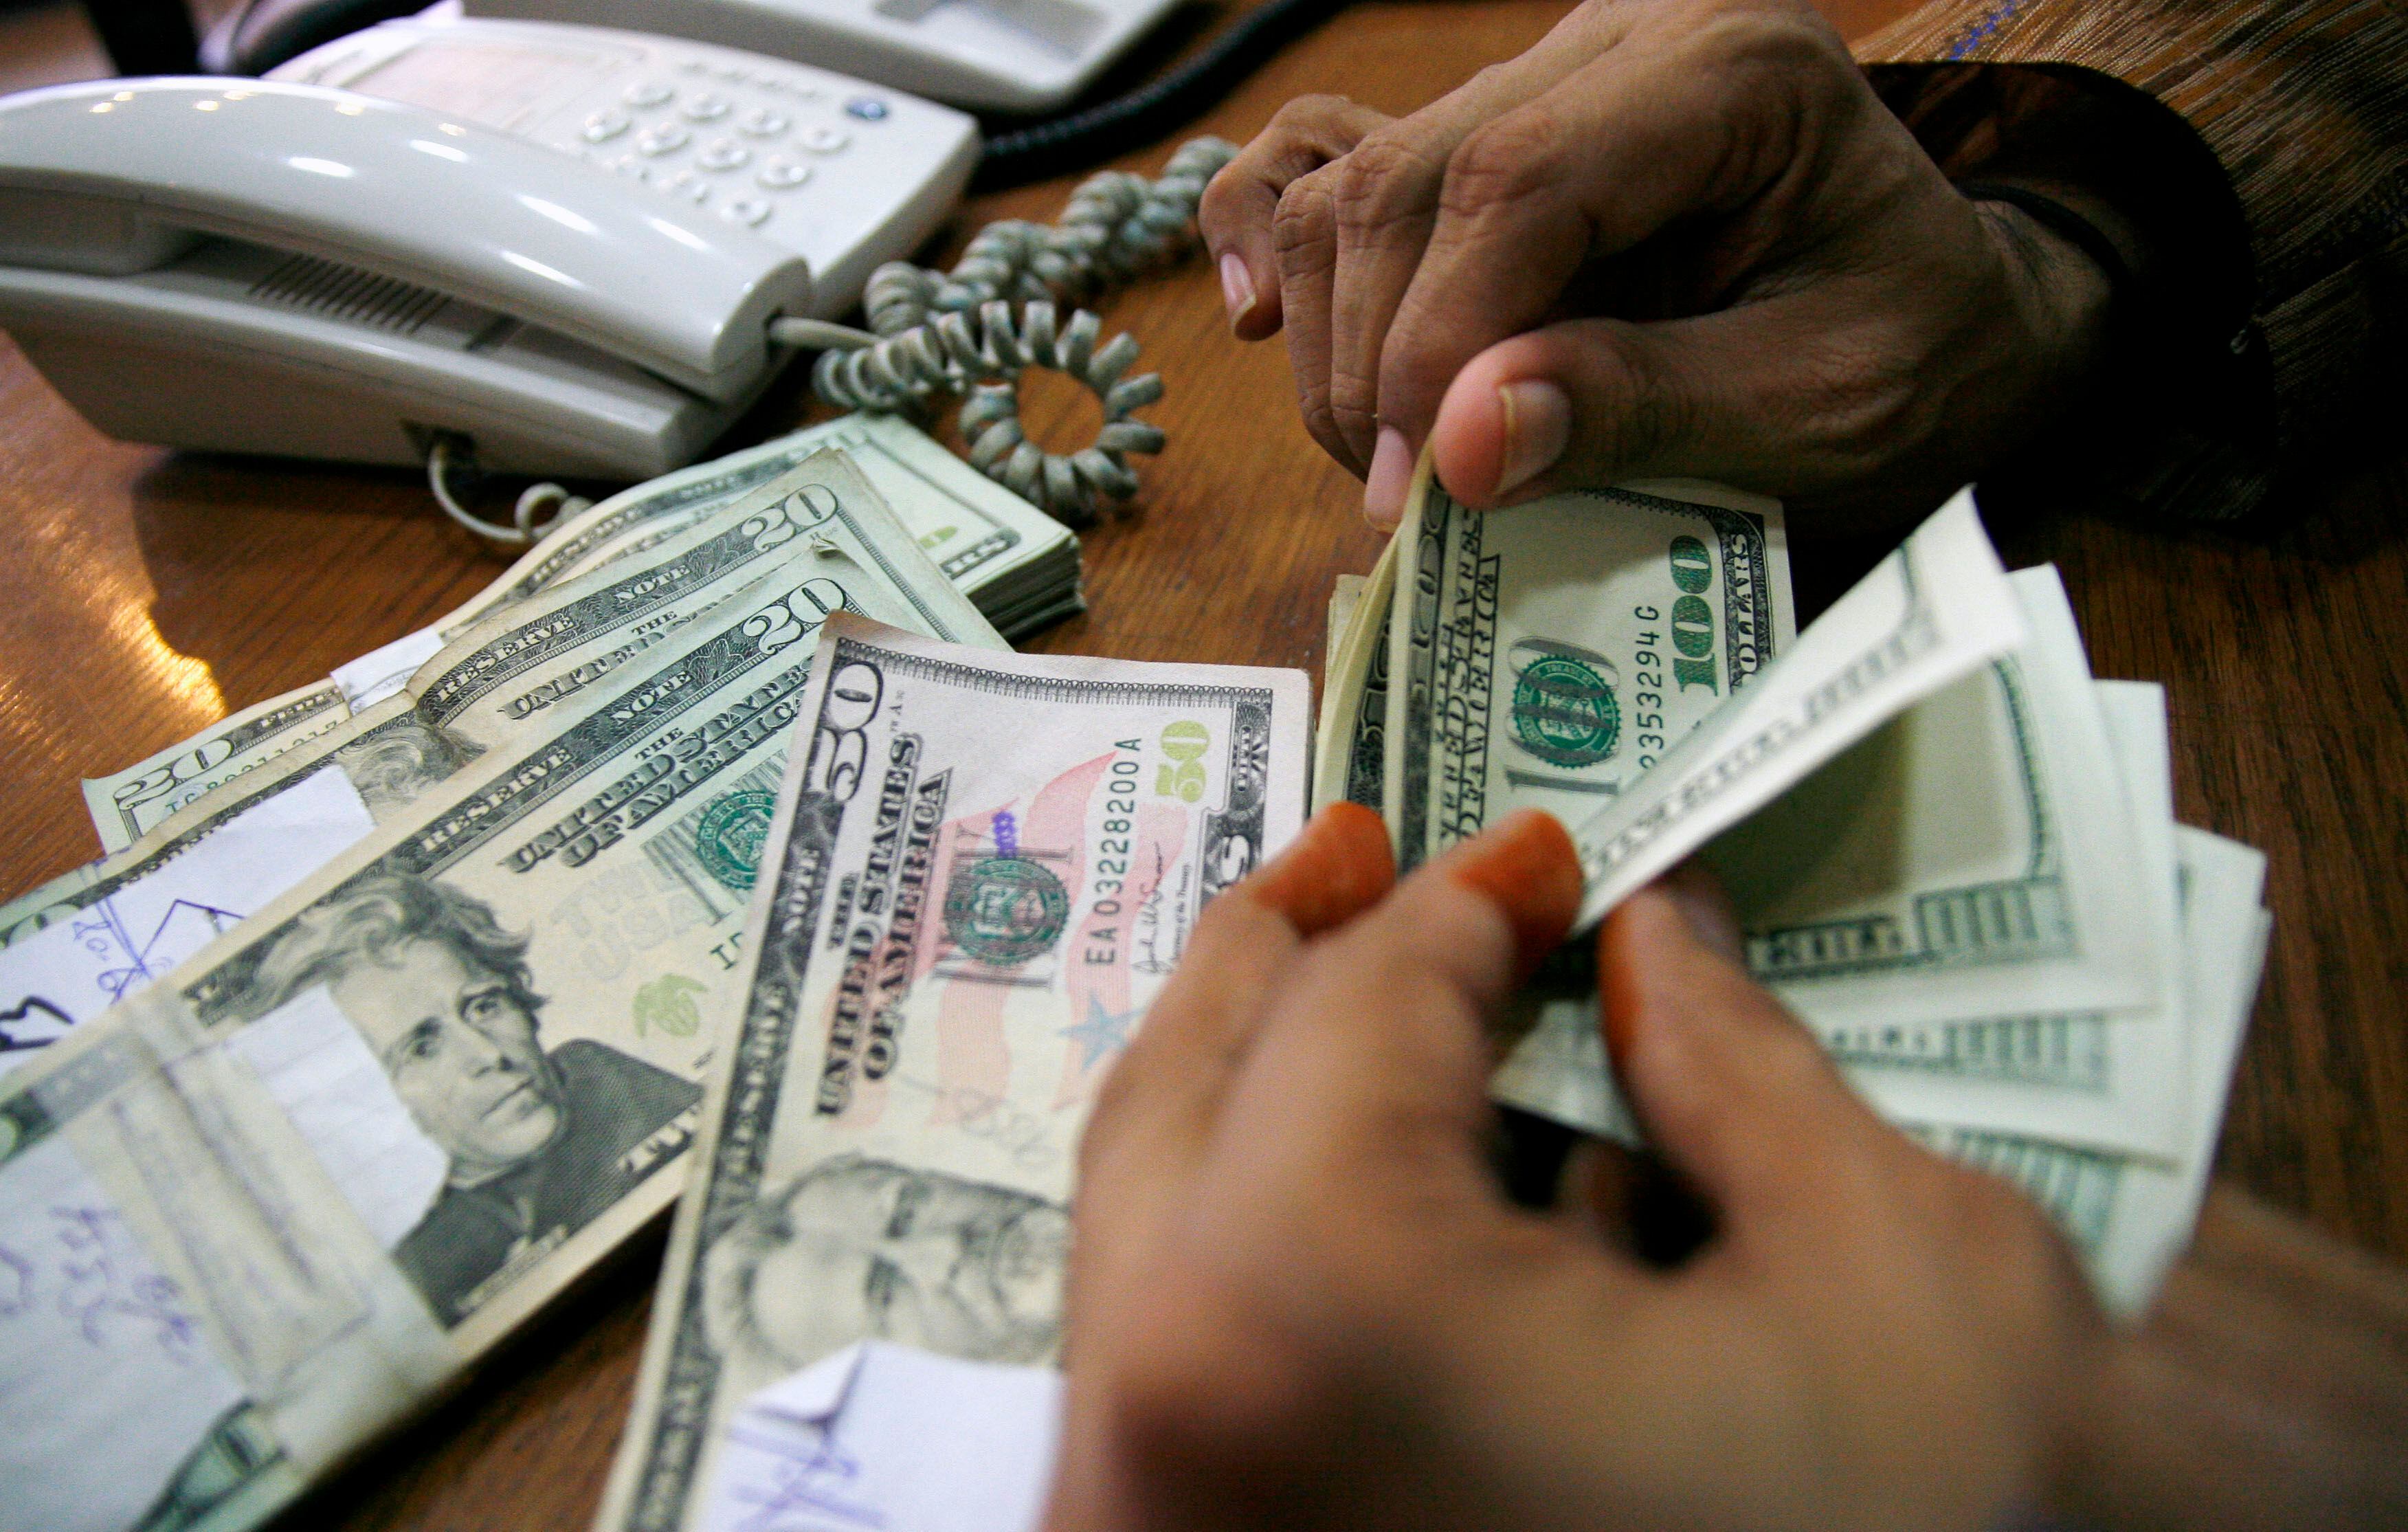 A Pakistani currency deader counts U.S. dollars at his shop in Karachi, Pakistan, Tuesday, Oct. 7, 2008. The rupee edged to a record low to the U.S. dollar during the last few minutes of interbank trade on Tuesday, weighed down by worsening economic fundamentals and unrelenting demand for dollars to cover imports. (AP Photo/Fareed Khan)